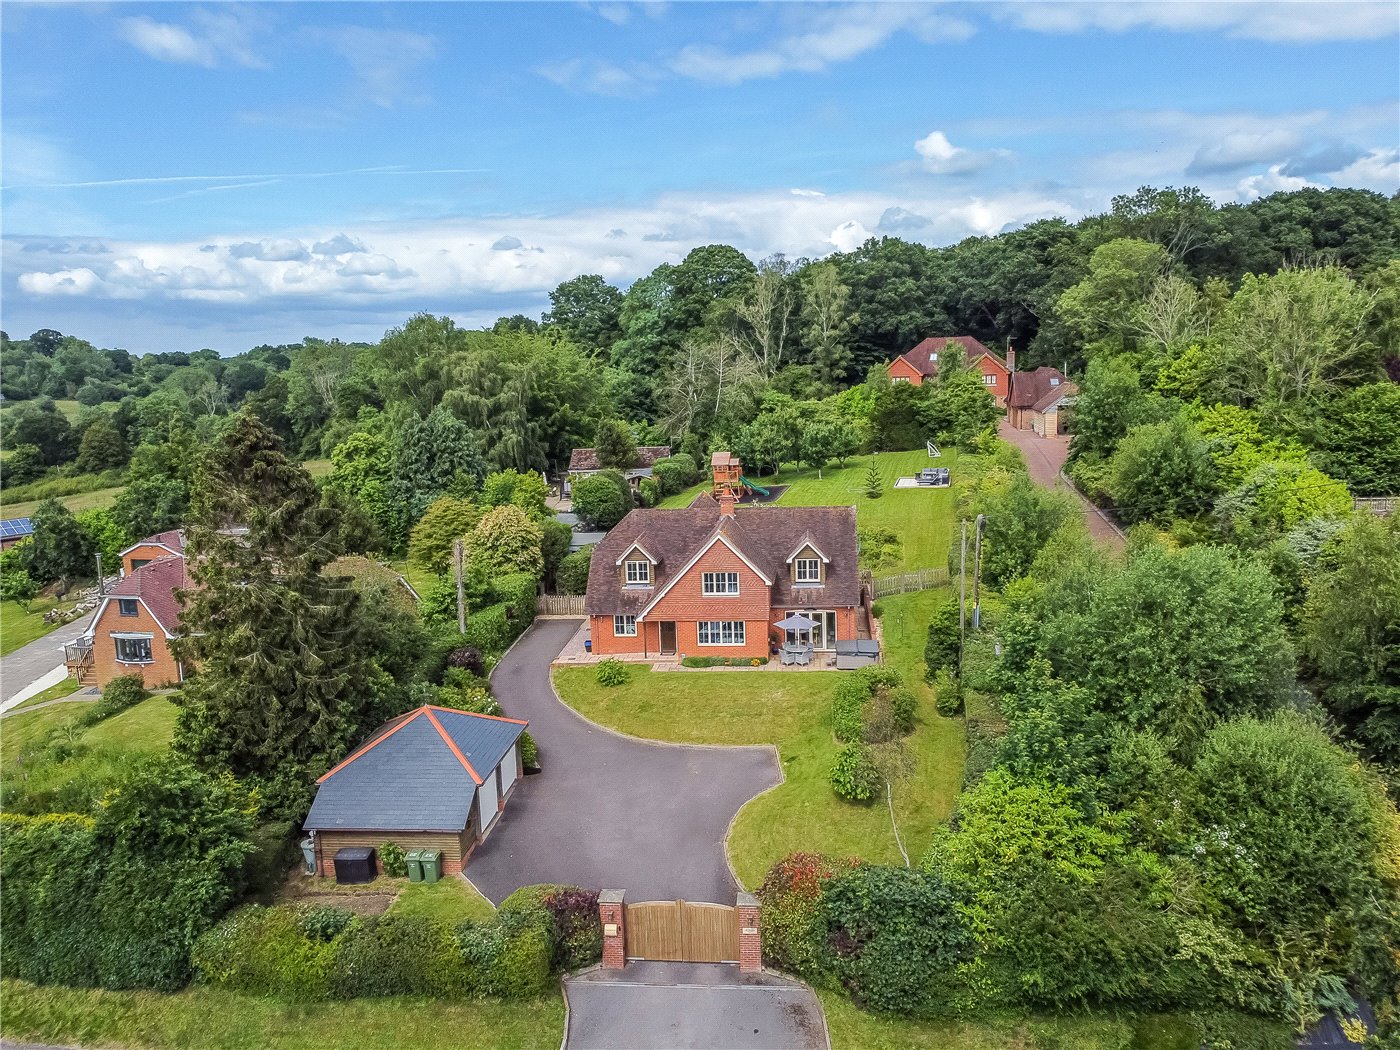 Dunwood Hill, East Wellow, Romsey, Hampshire, SO51